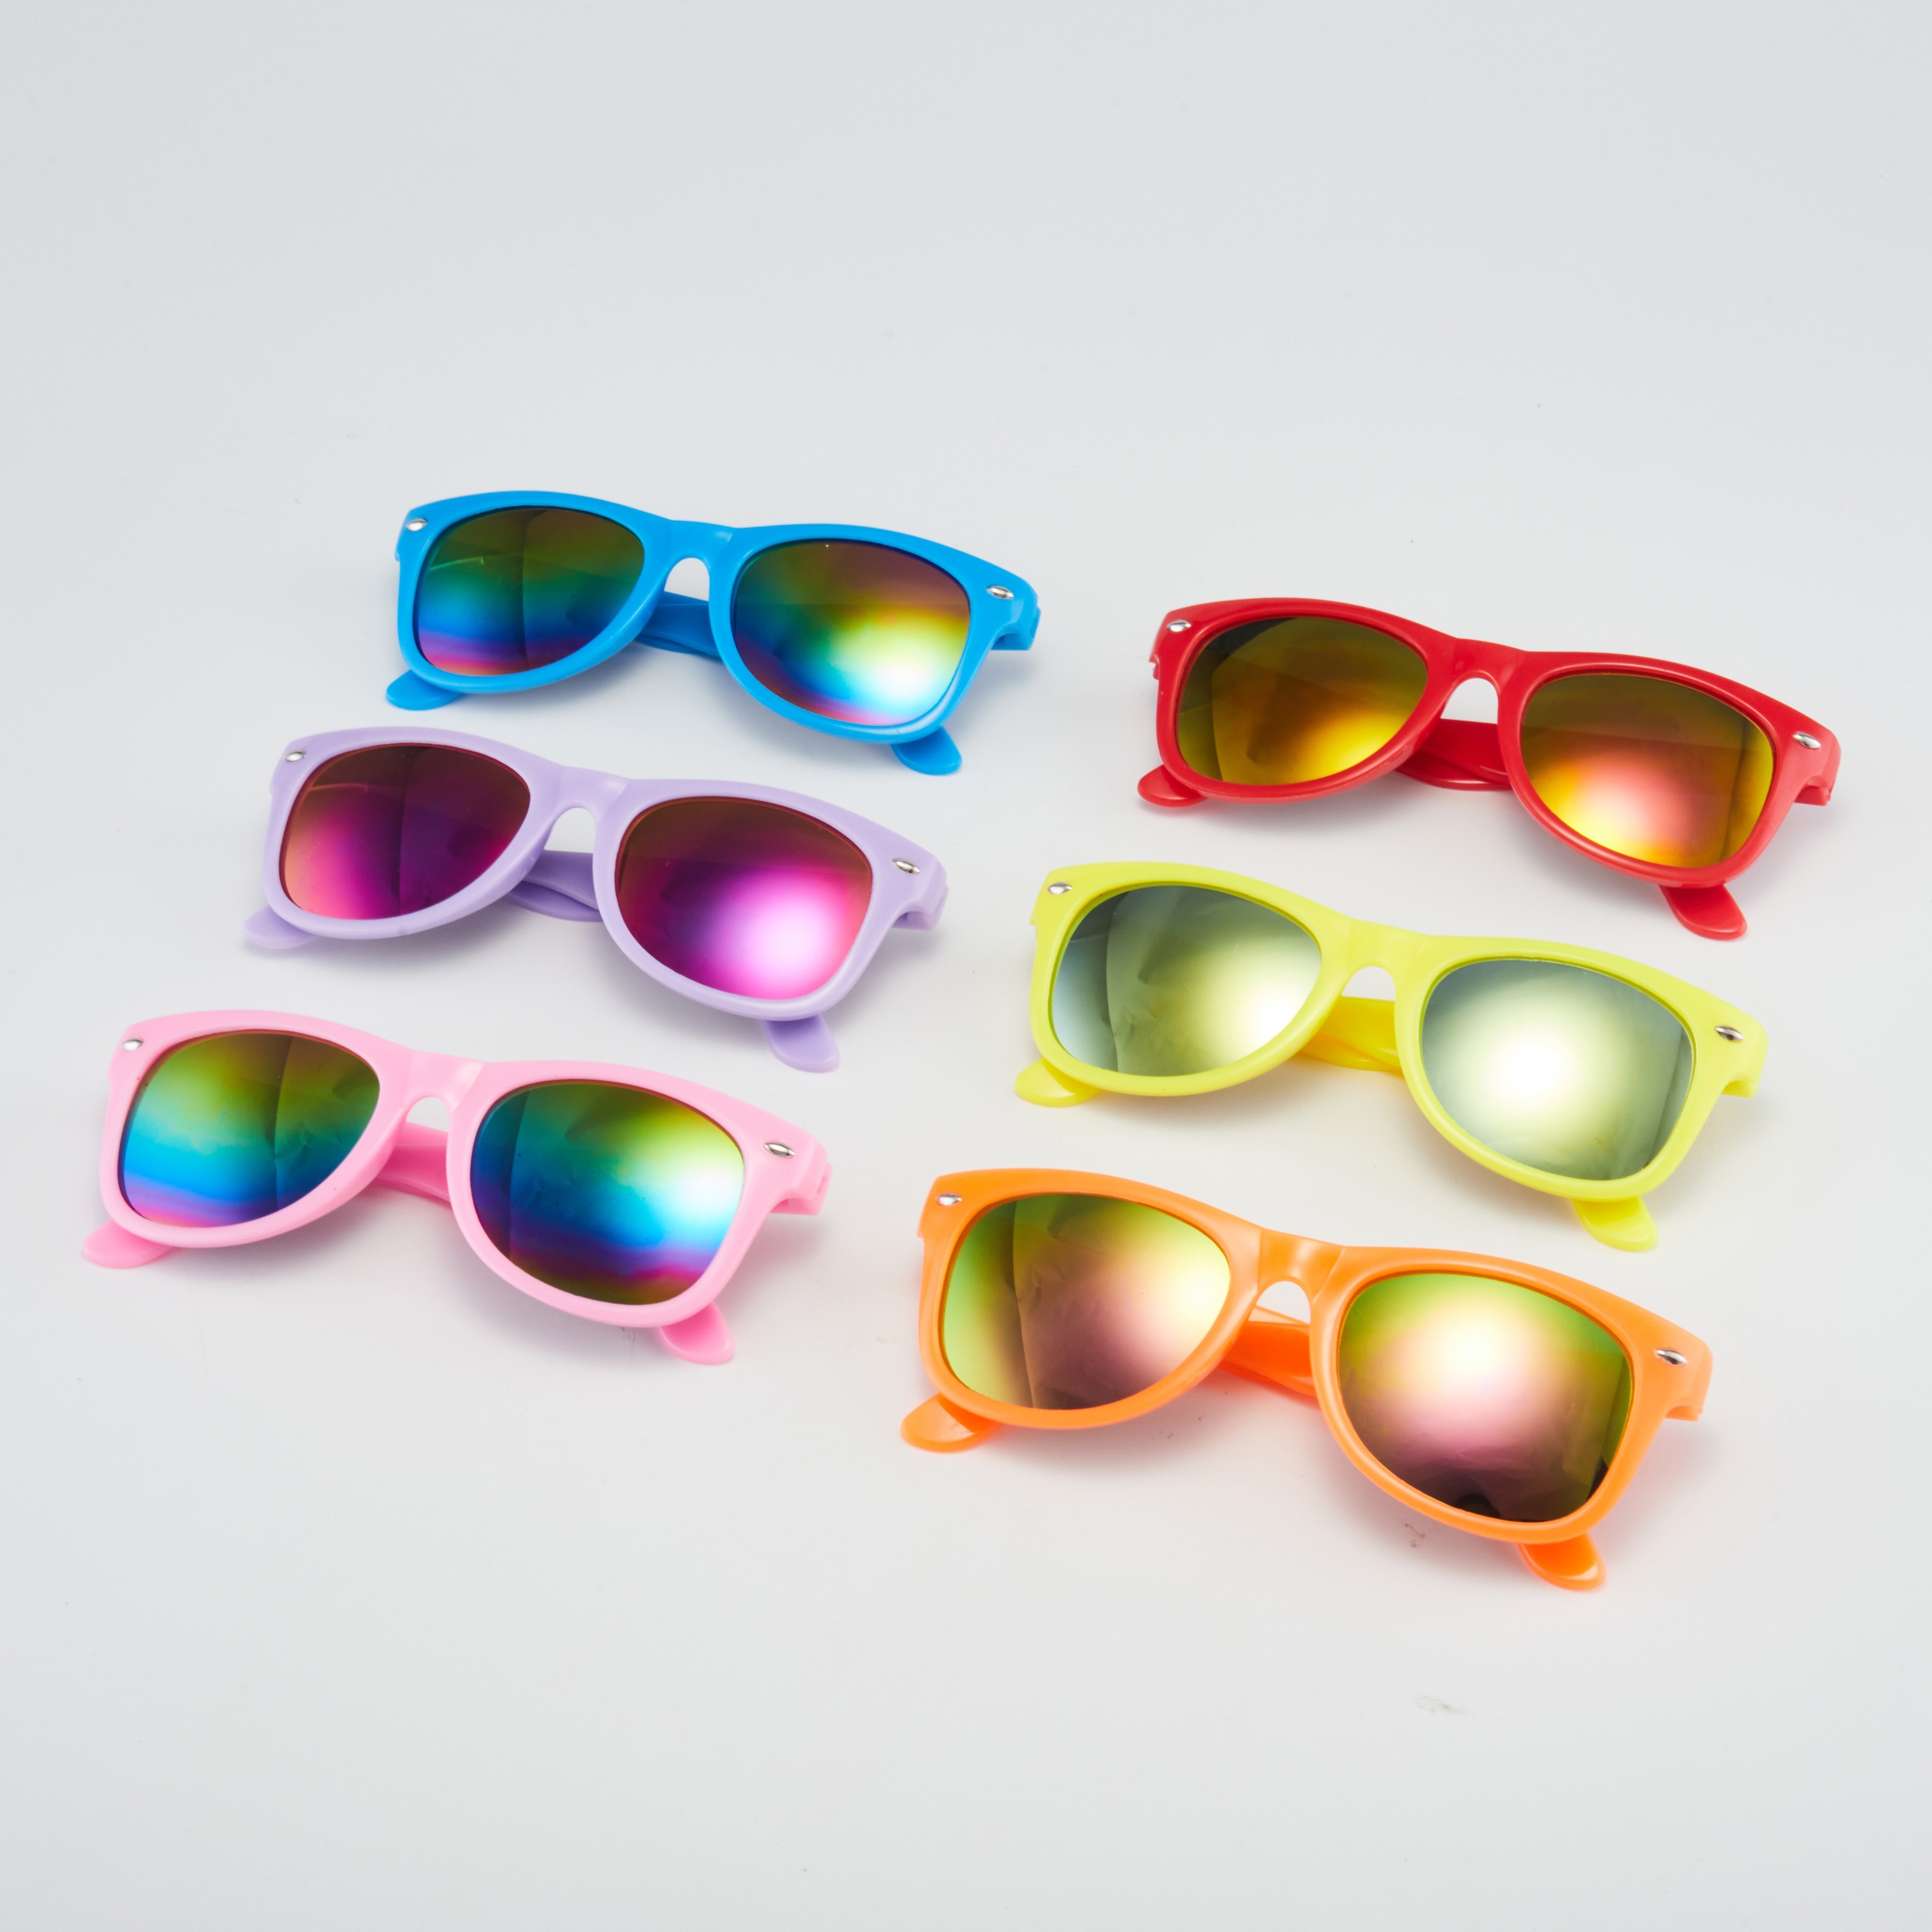 

12 Packs Of Kids' Neon Sunglasses With Uv400 Protection - Perfect For Pool Parties, Birthday Favors, And Goody Bags! Christmas, Halloween, Thanksgiving Day Gift